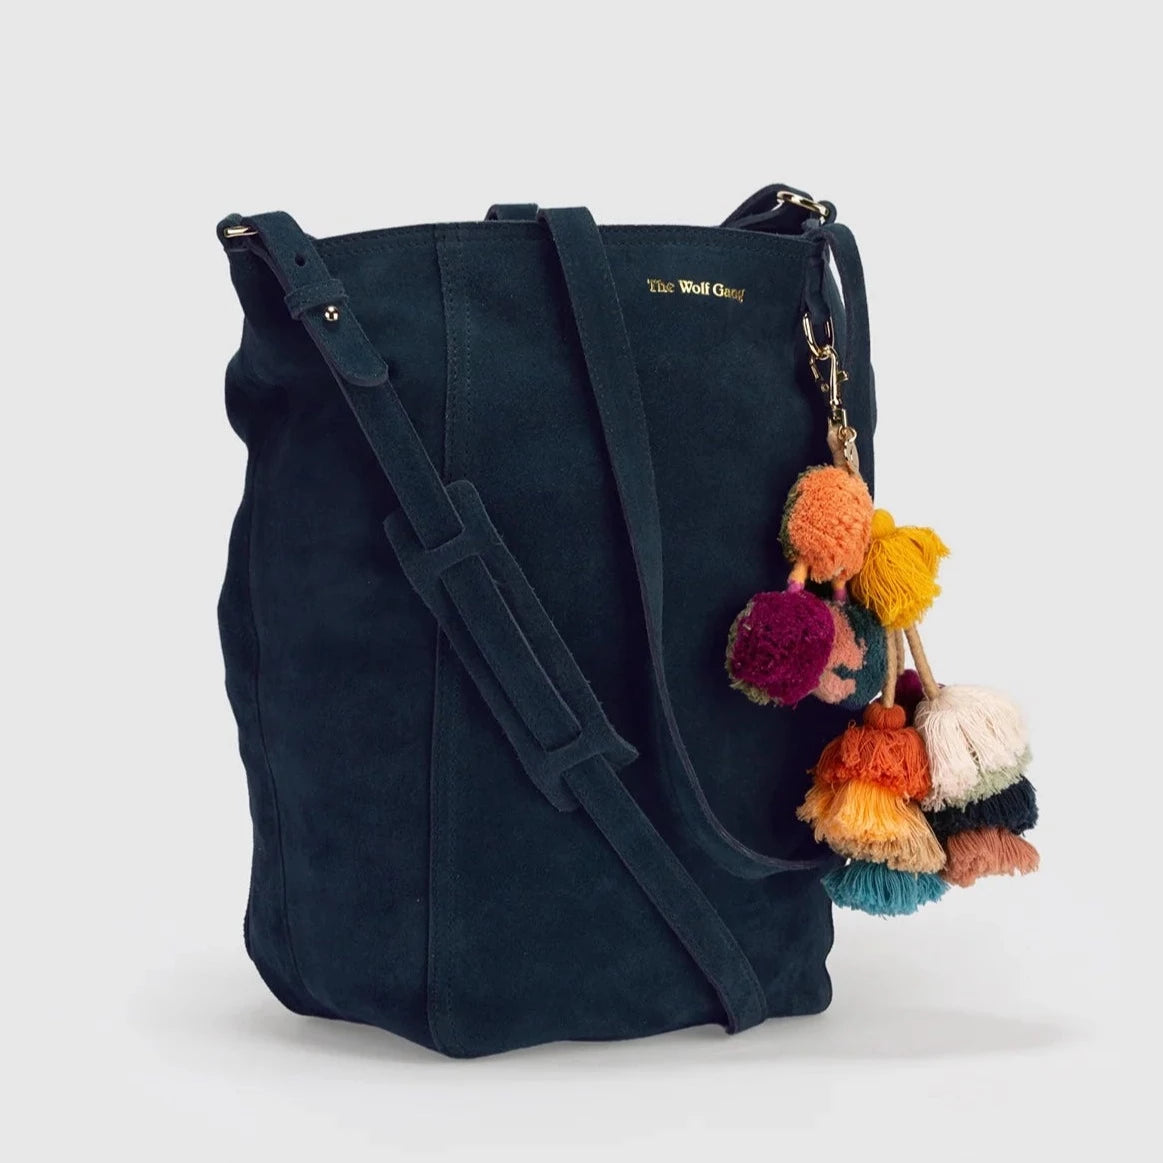 Berber Tote in Midnight by The Wolf Gang